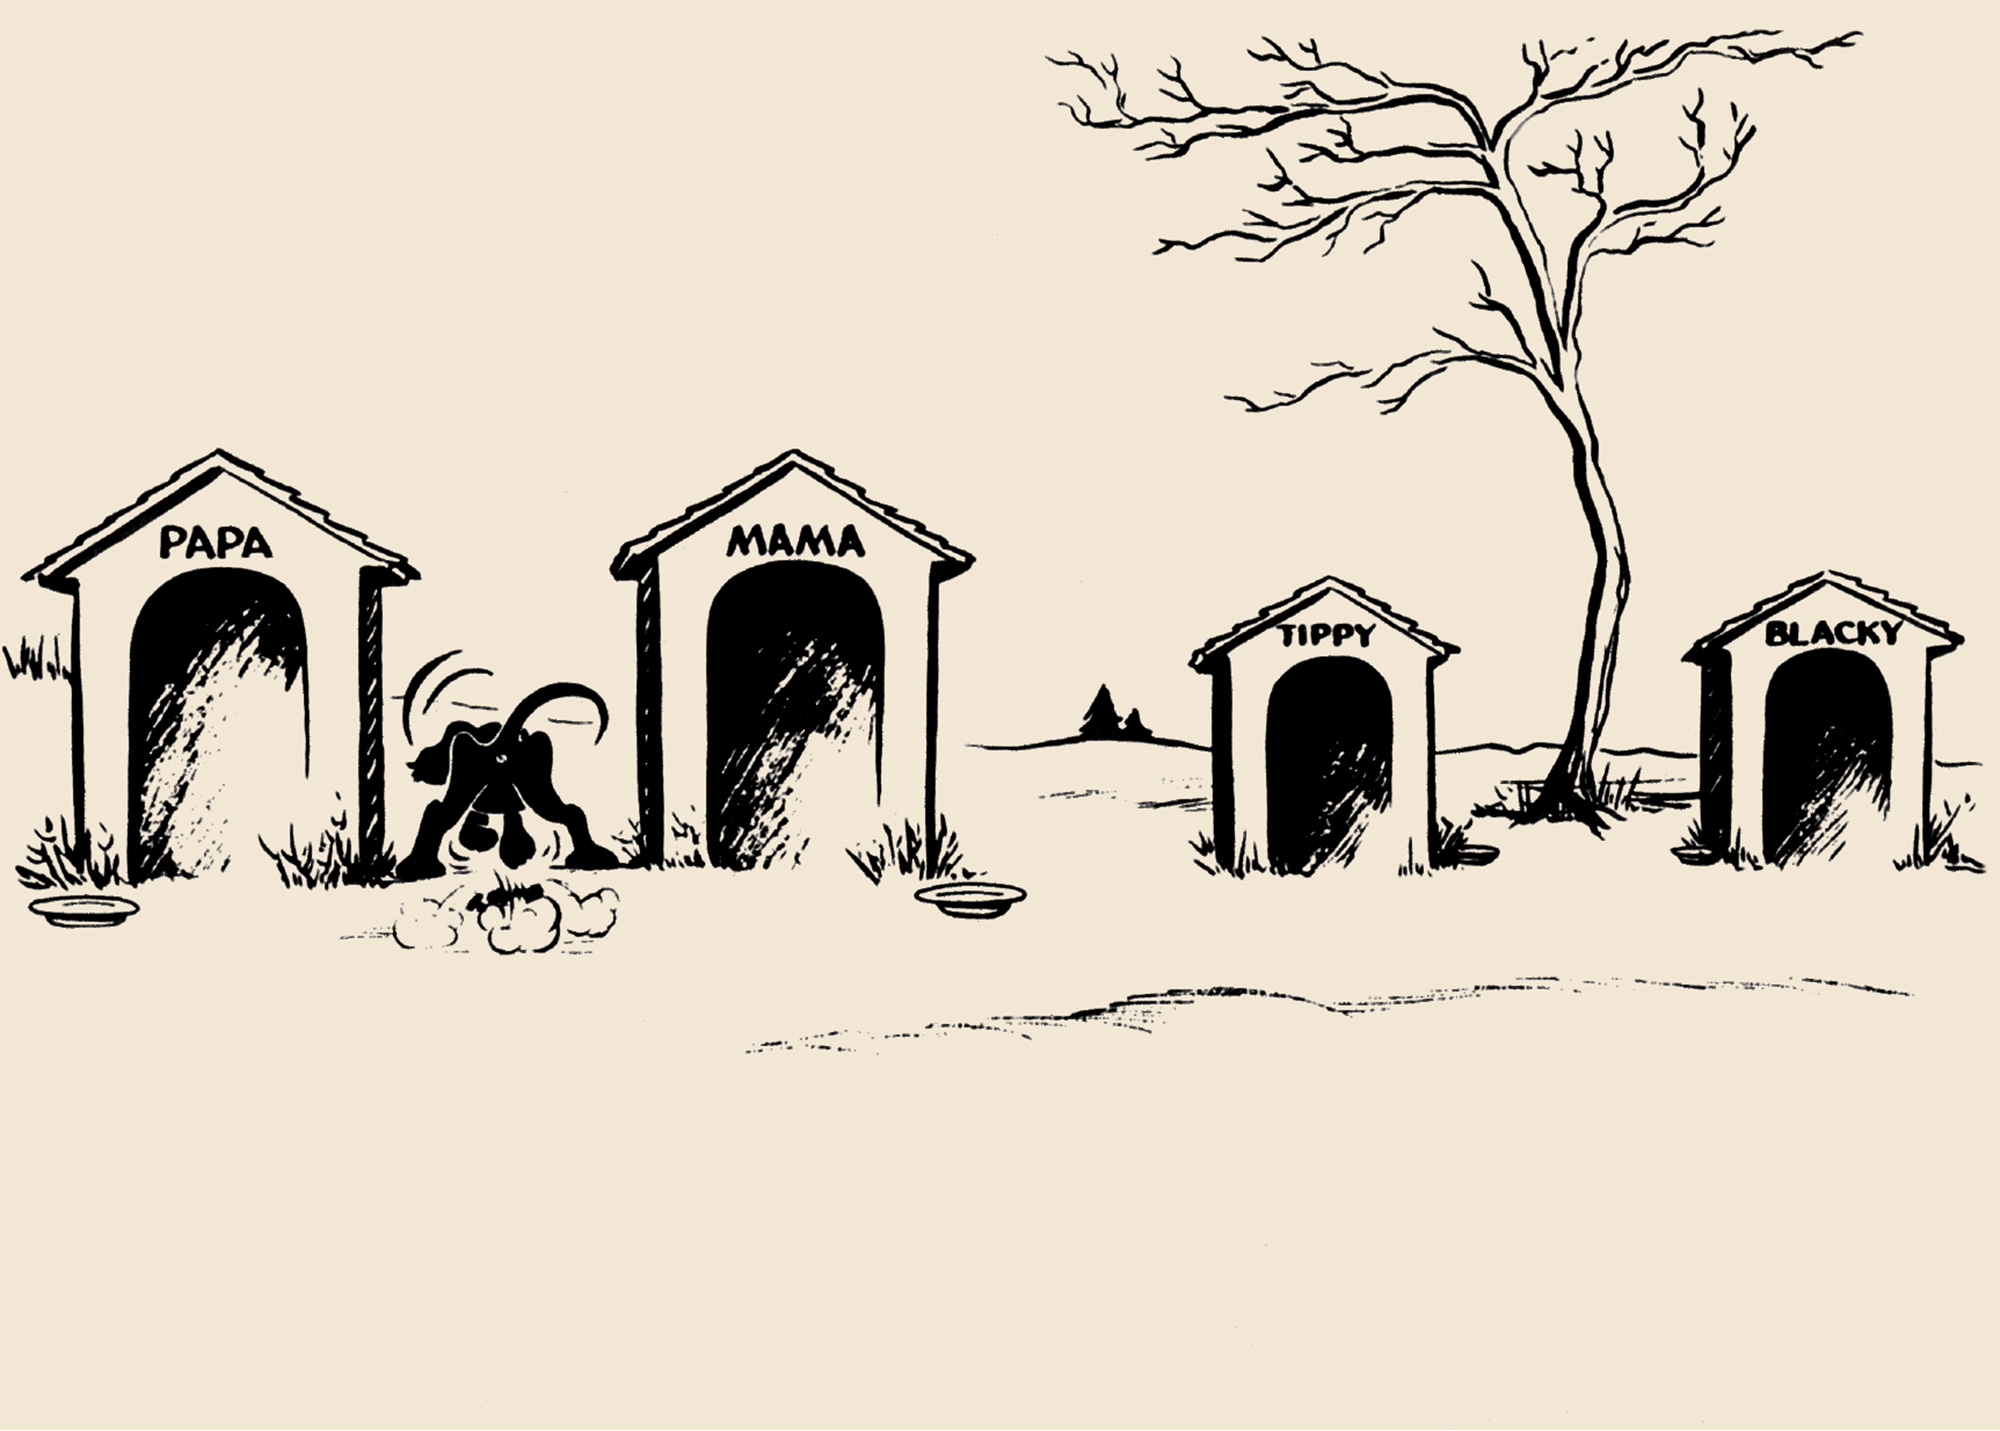 A cartoon drawing from the Blacky Picture Test which features Blacky the dog digging a hole next to four dog houses. The dog houses are labelled Papa, Mama, Tippy, and Blacky.